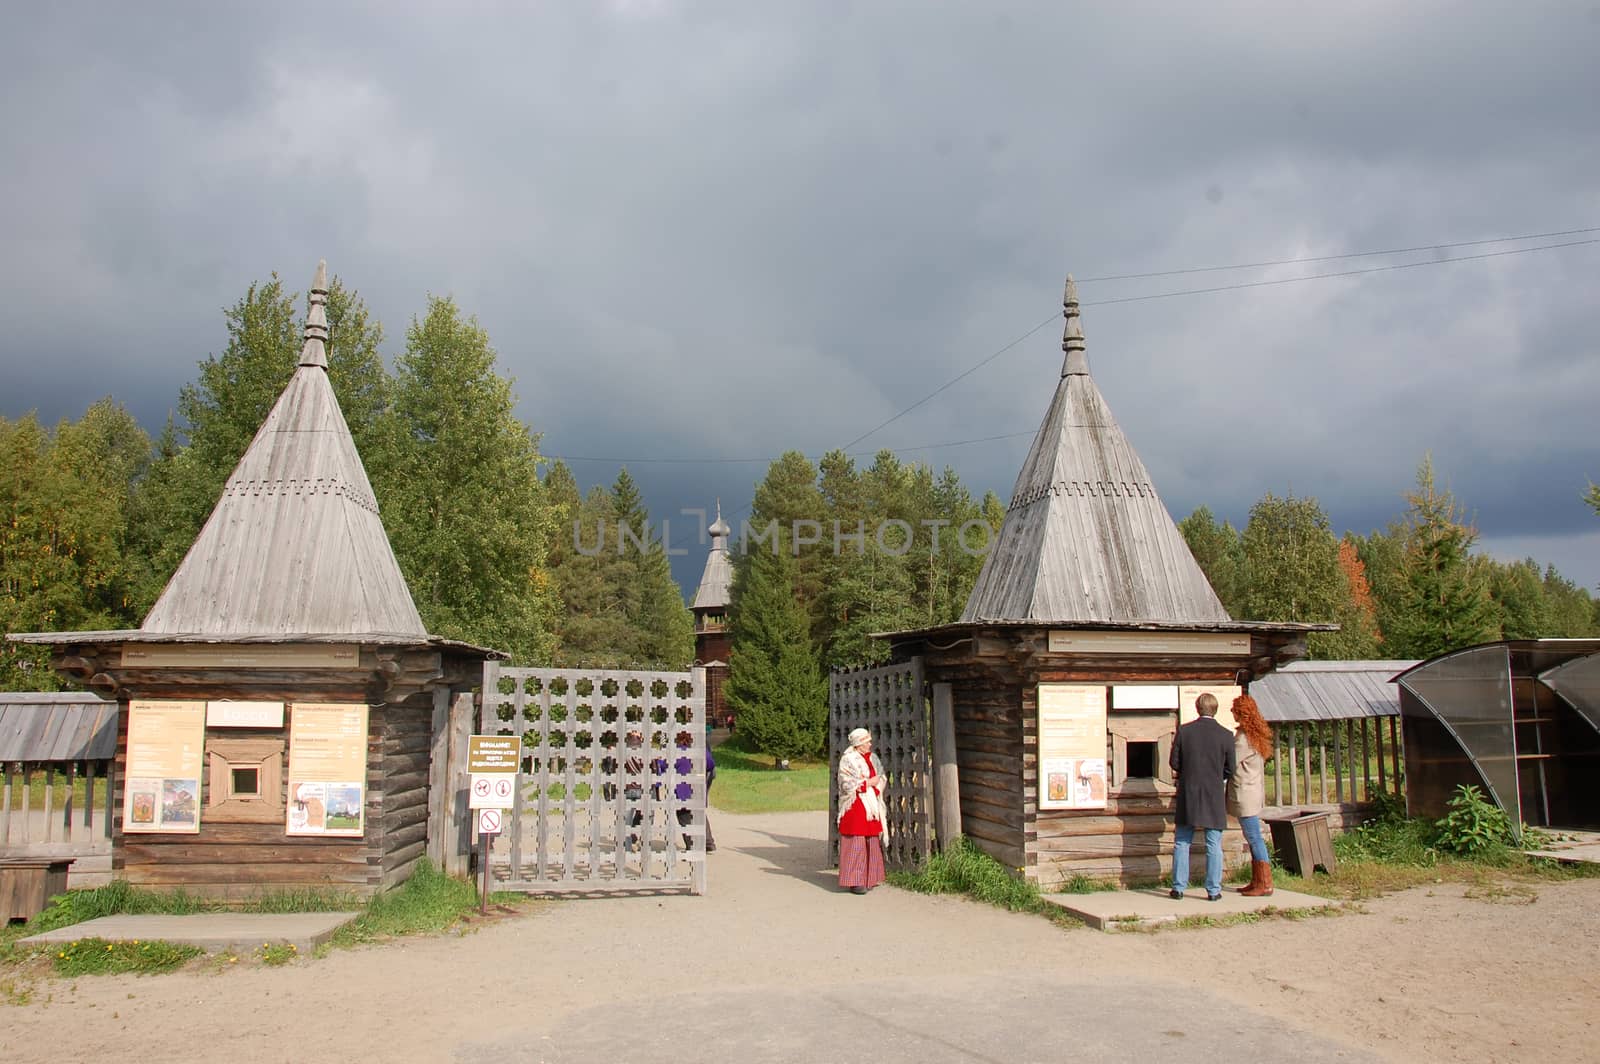  Museum of wooden architecture entrance, Malye Karely,Russia